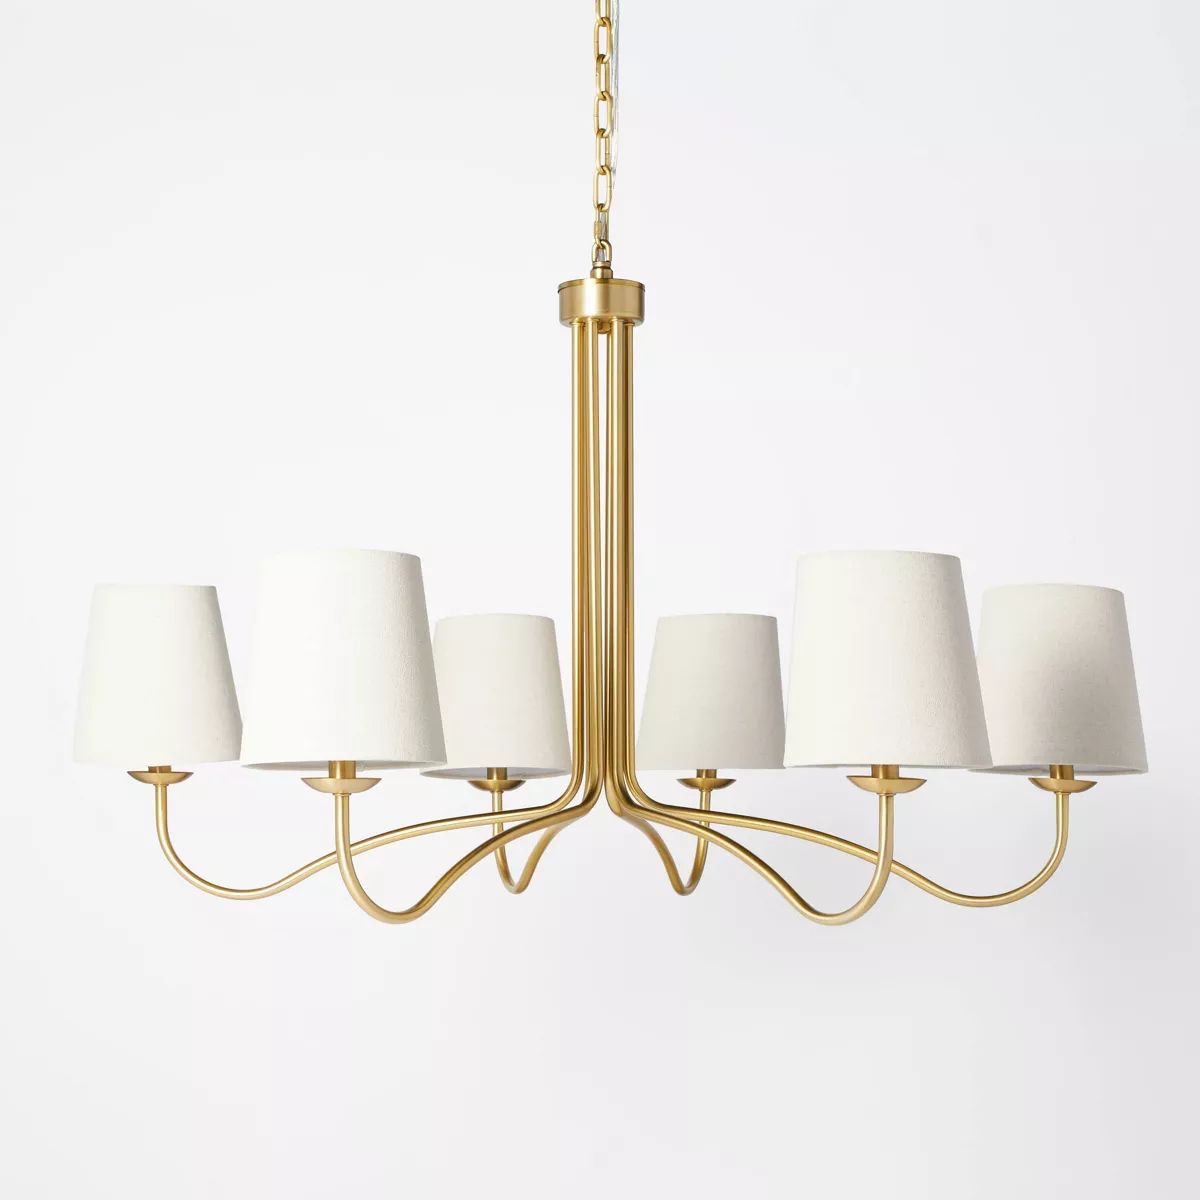 6-Arm Candelabra Chandelier Ceiling Light - Hearth & Hand™ with Magnolia | Target